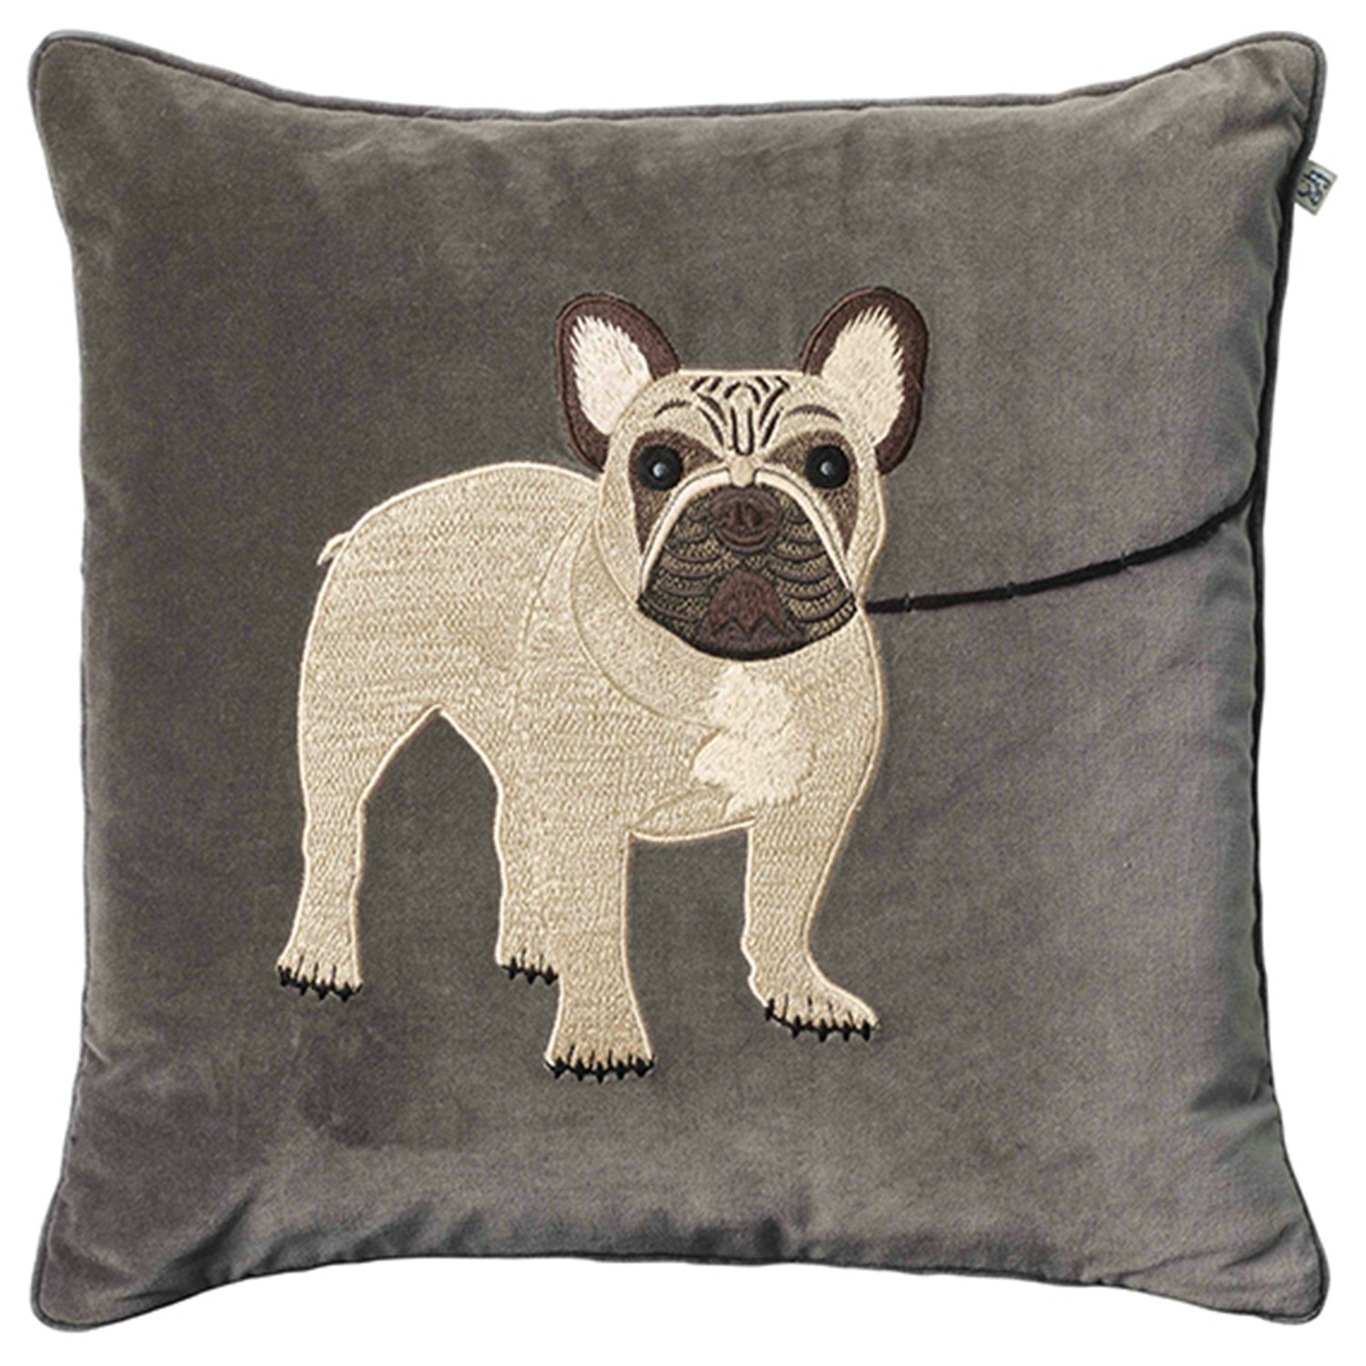 Embroidered French Bull Dog Kussensloop 50 x 50 cm, Grijs